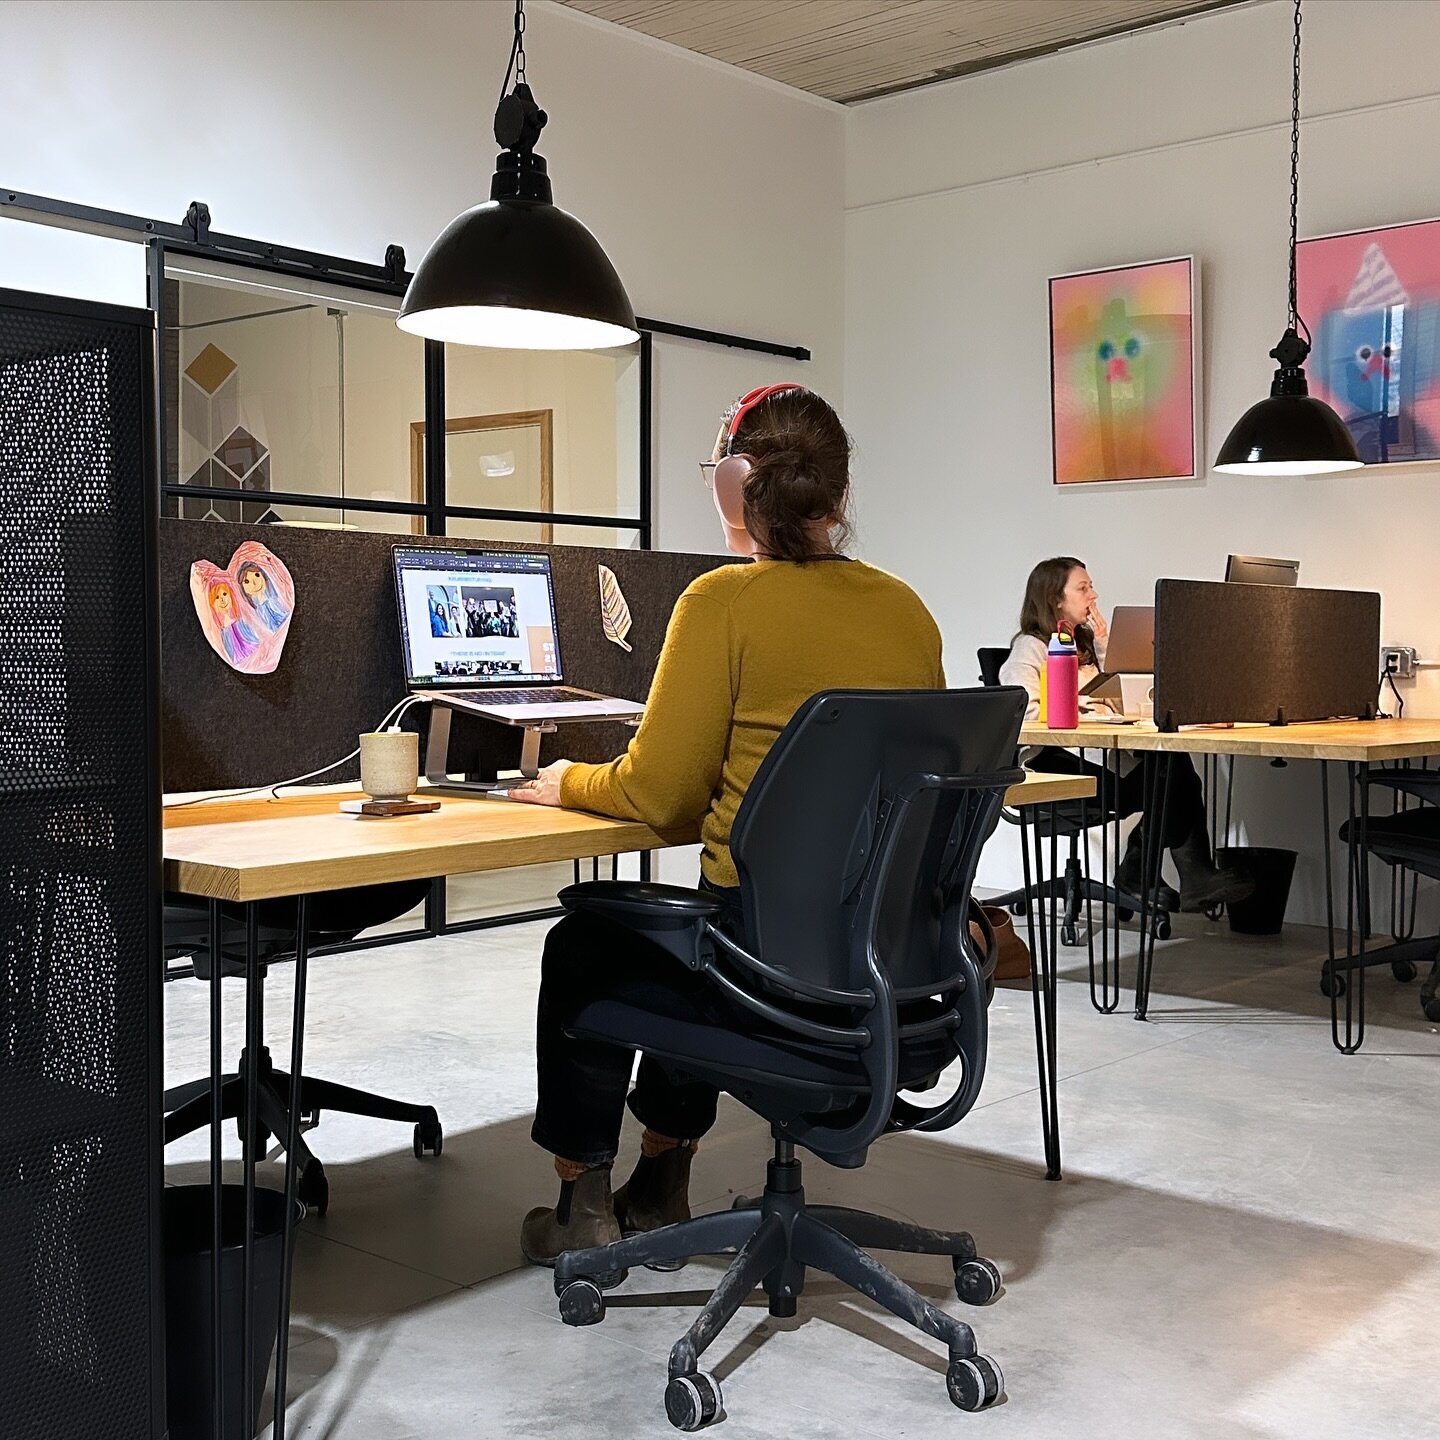 Happy New Year! Ready to break free from the WFH routine? We have two desks available!

Join a small community of friends and get a spacious desk paired with a top-notch chair. We offer two phone booths for private calls and virtual meetings, a share